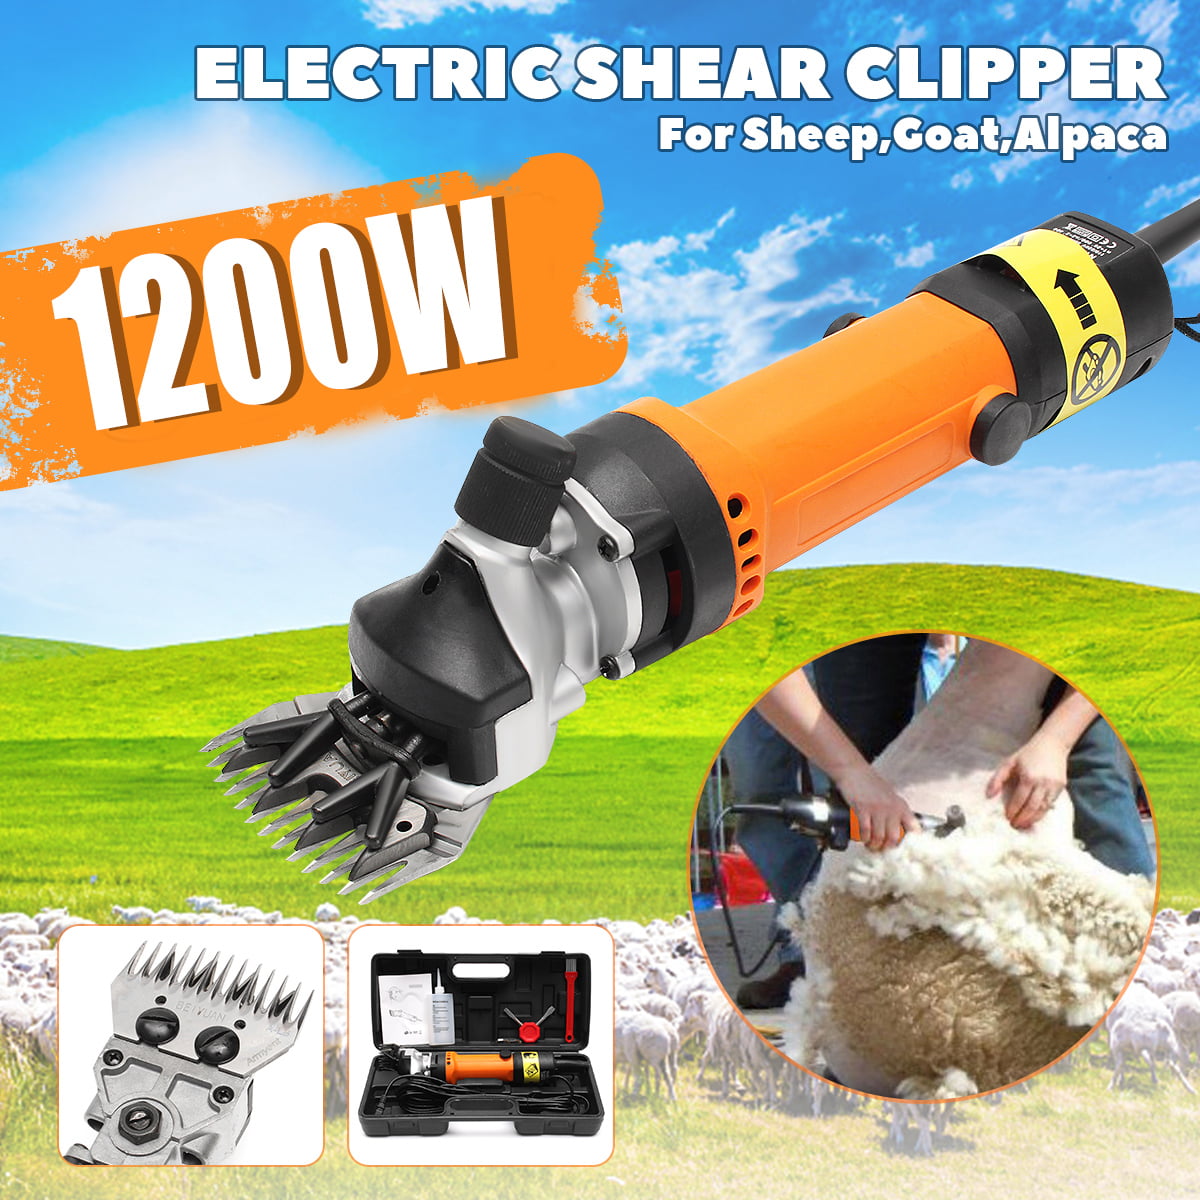 1200W Electric Sheep Shear Clipper Wool Goats Livestock Trimmer Grooming 220V 3 